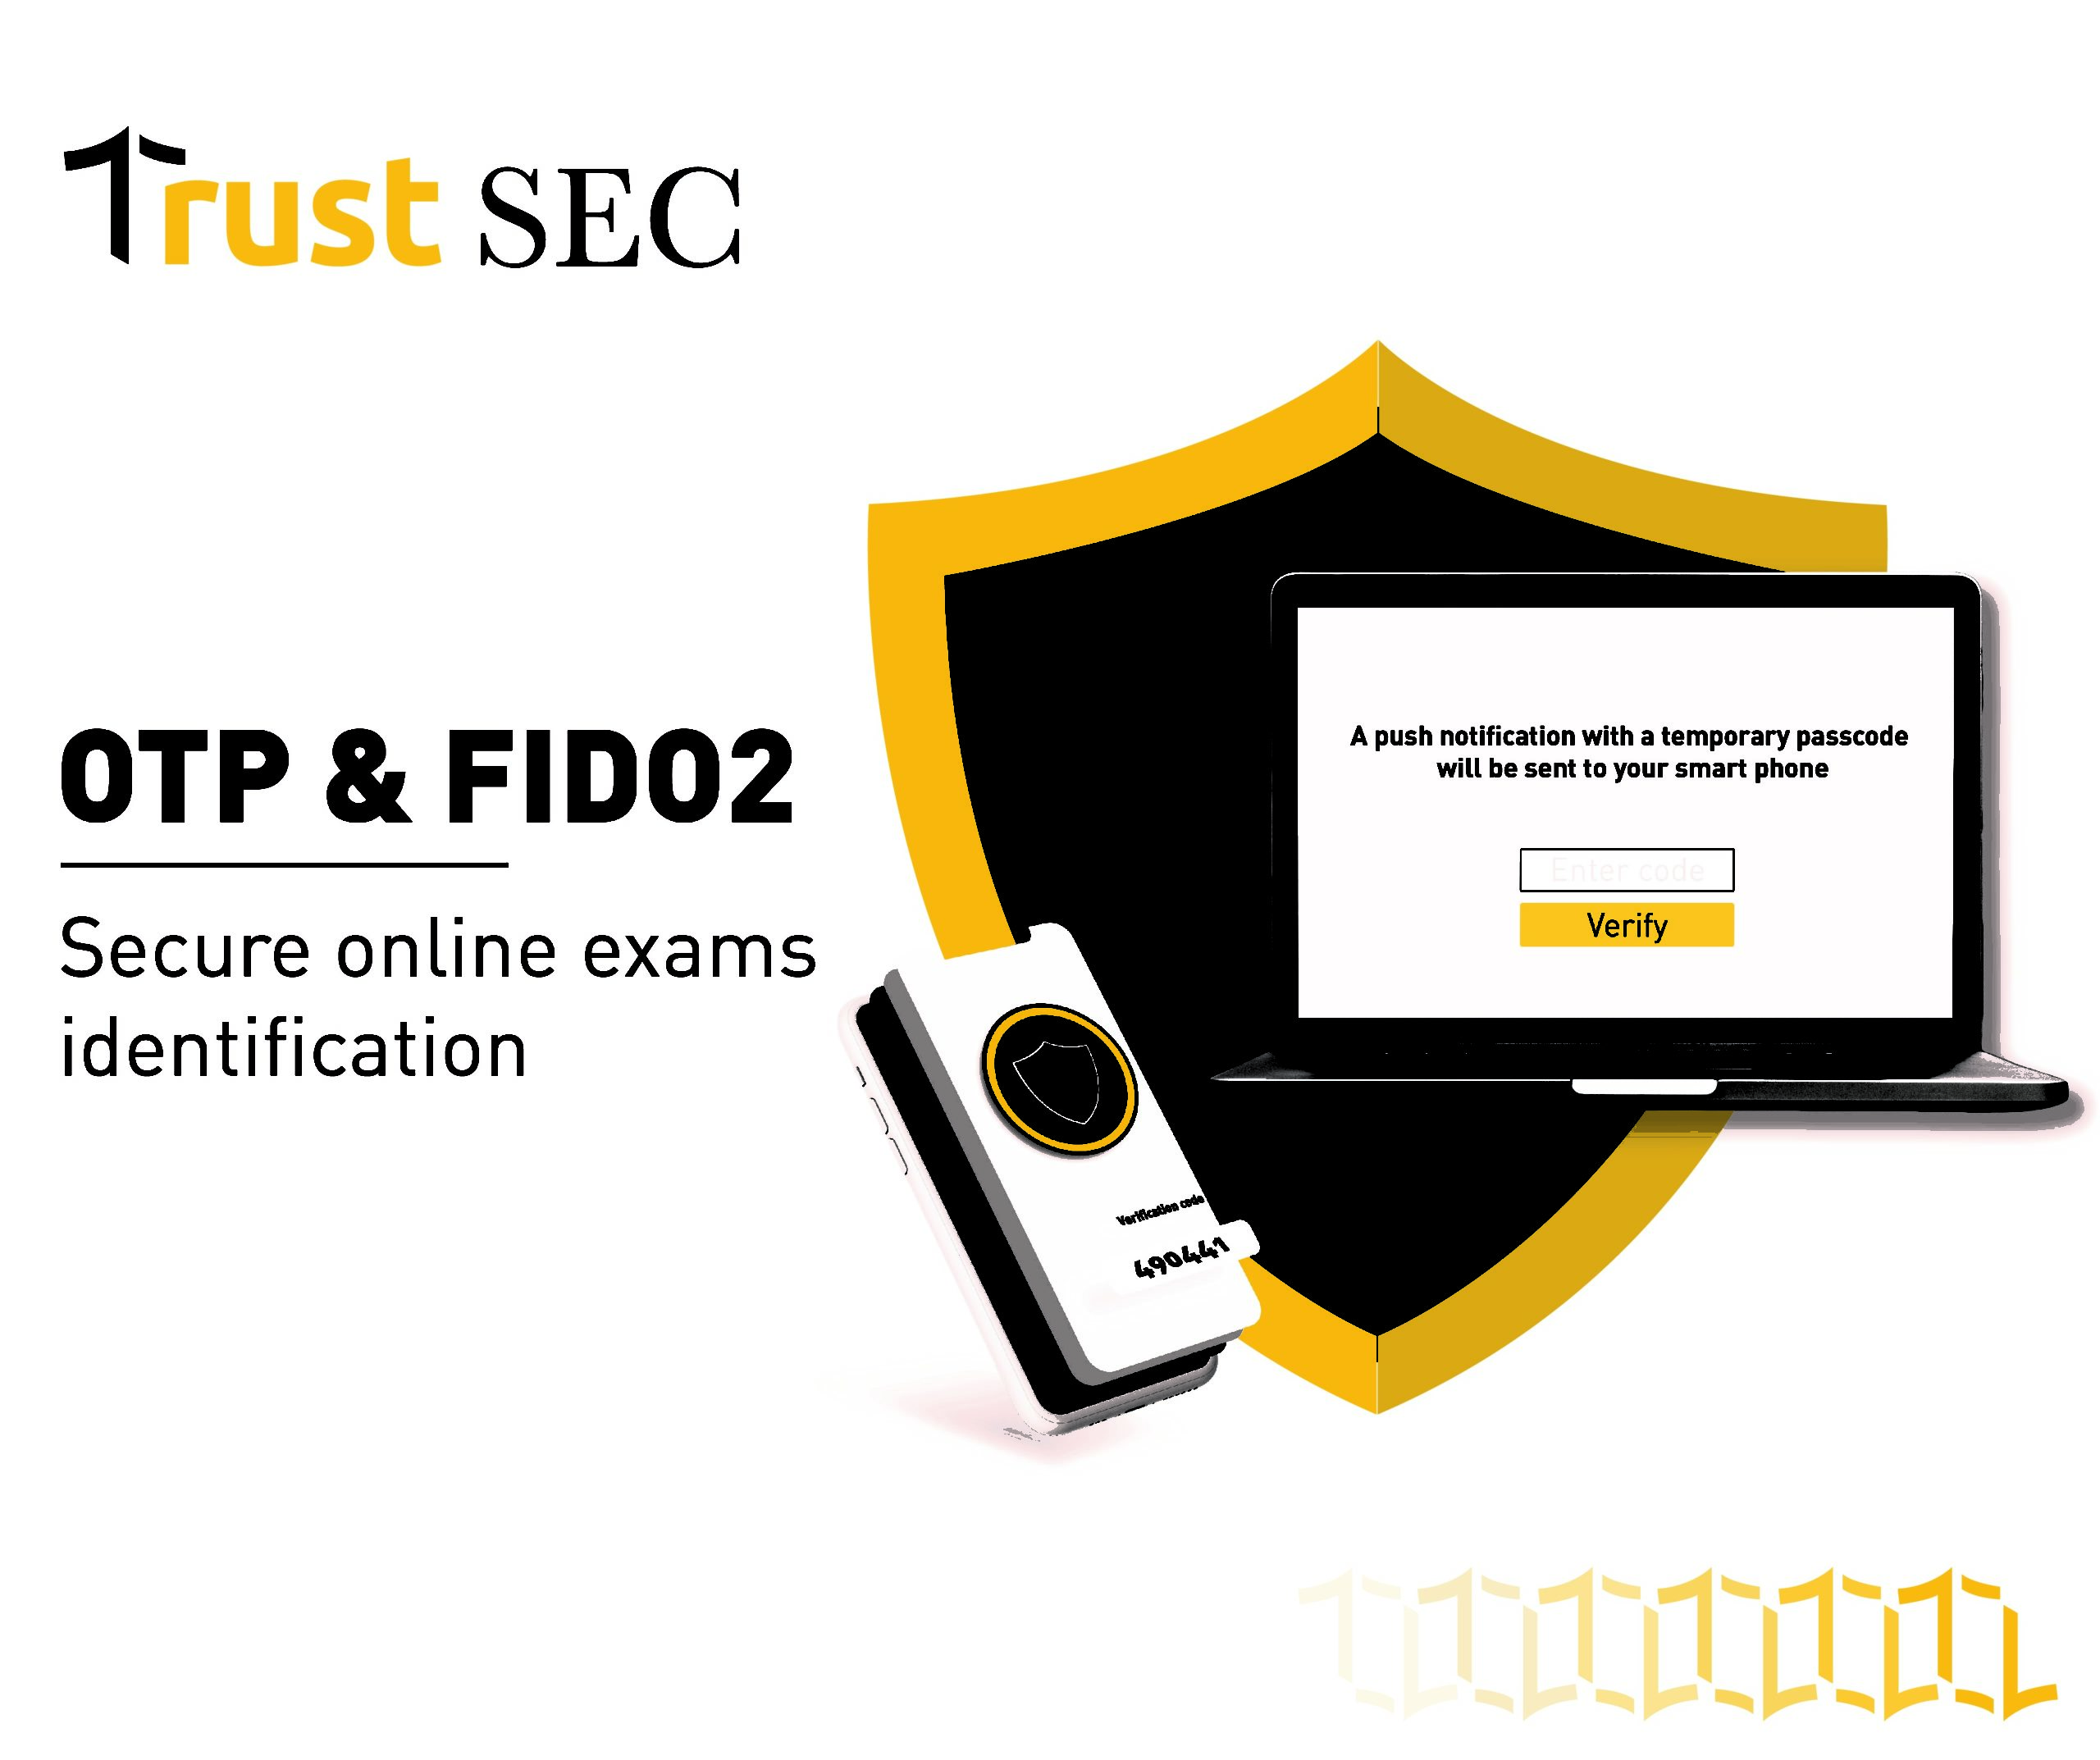 Secure-online-exams-identification